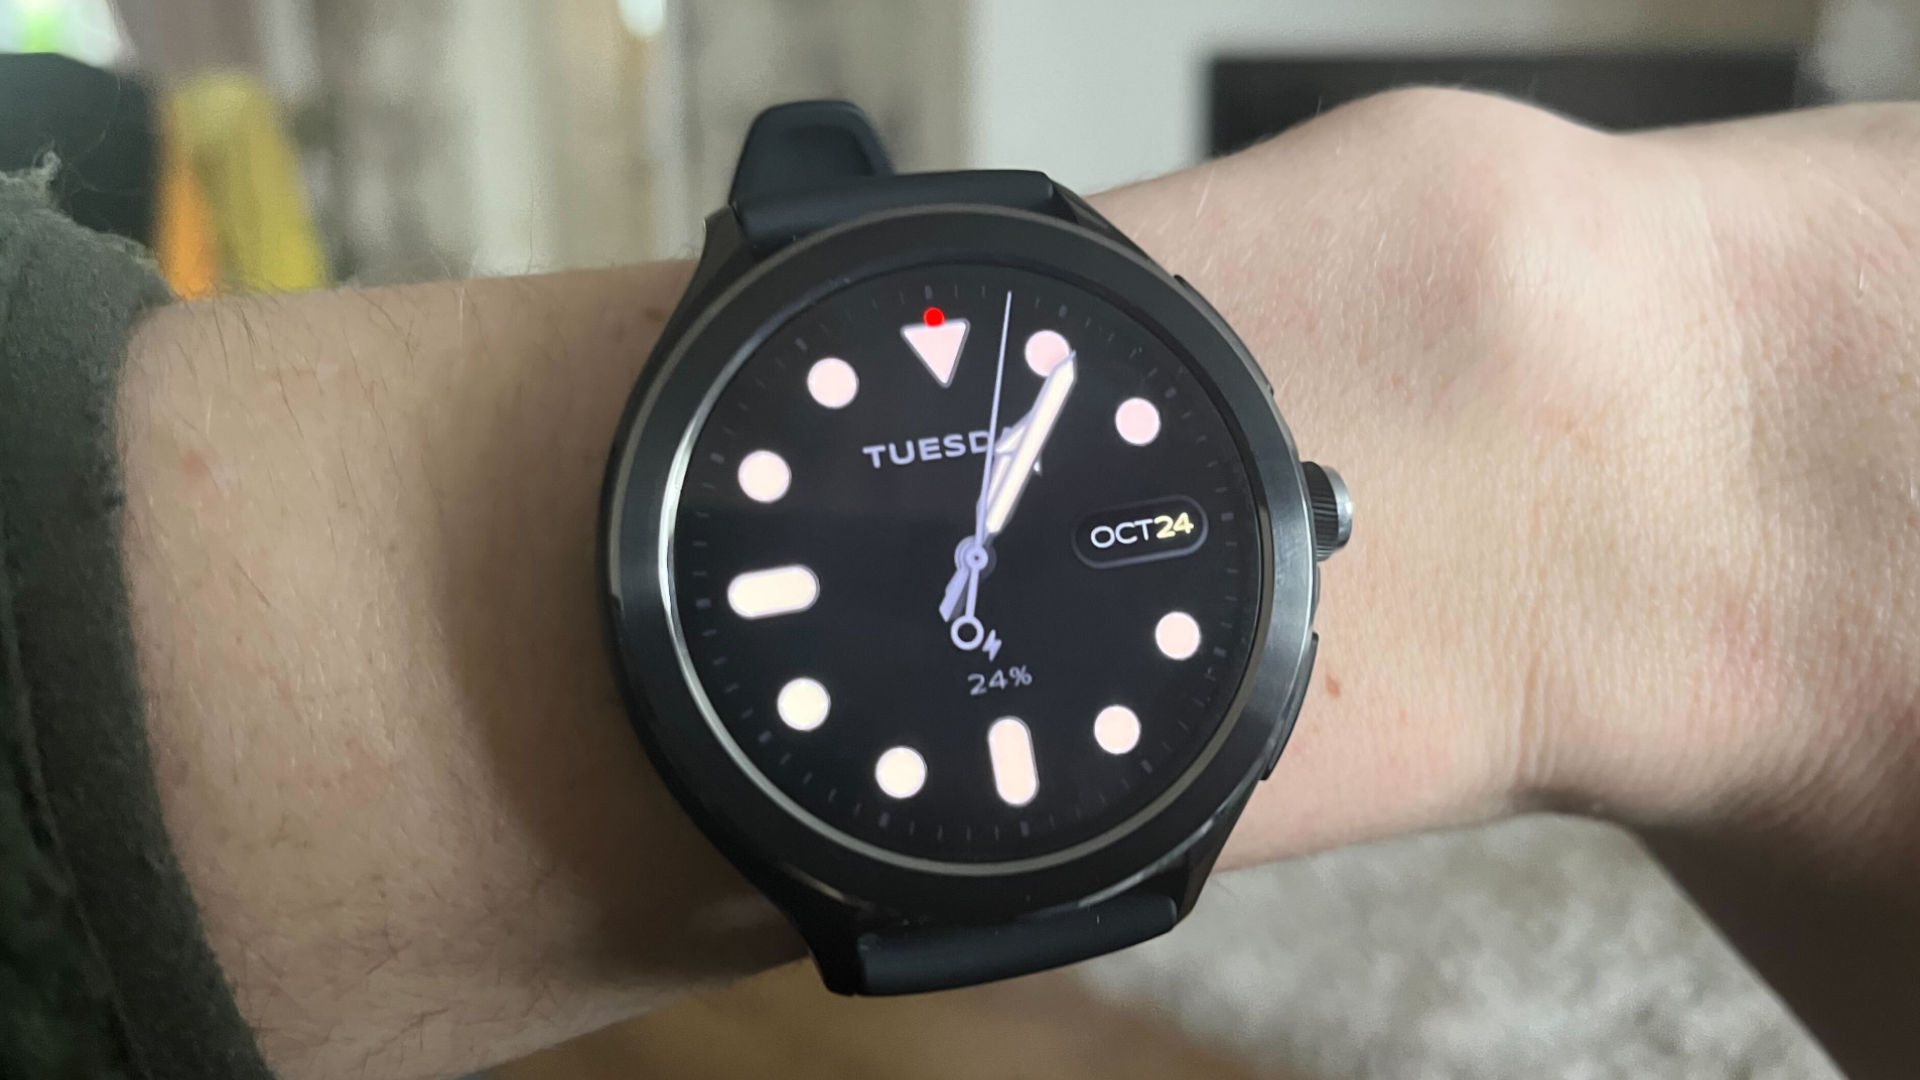 Xiaomi Watch 2 Pro Hands-on: The First Real Xiaomi Smartwatch